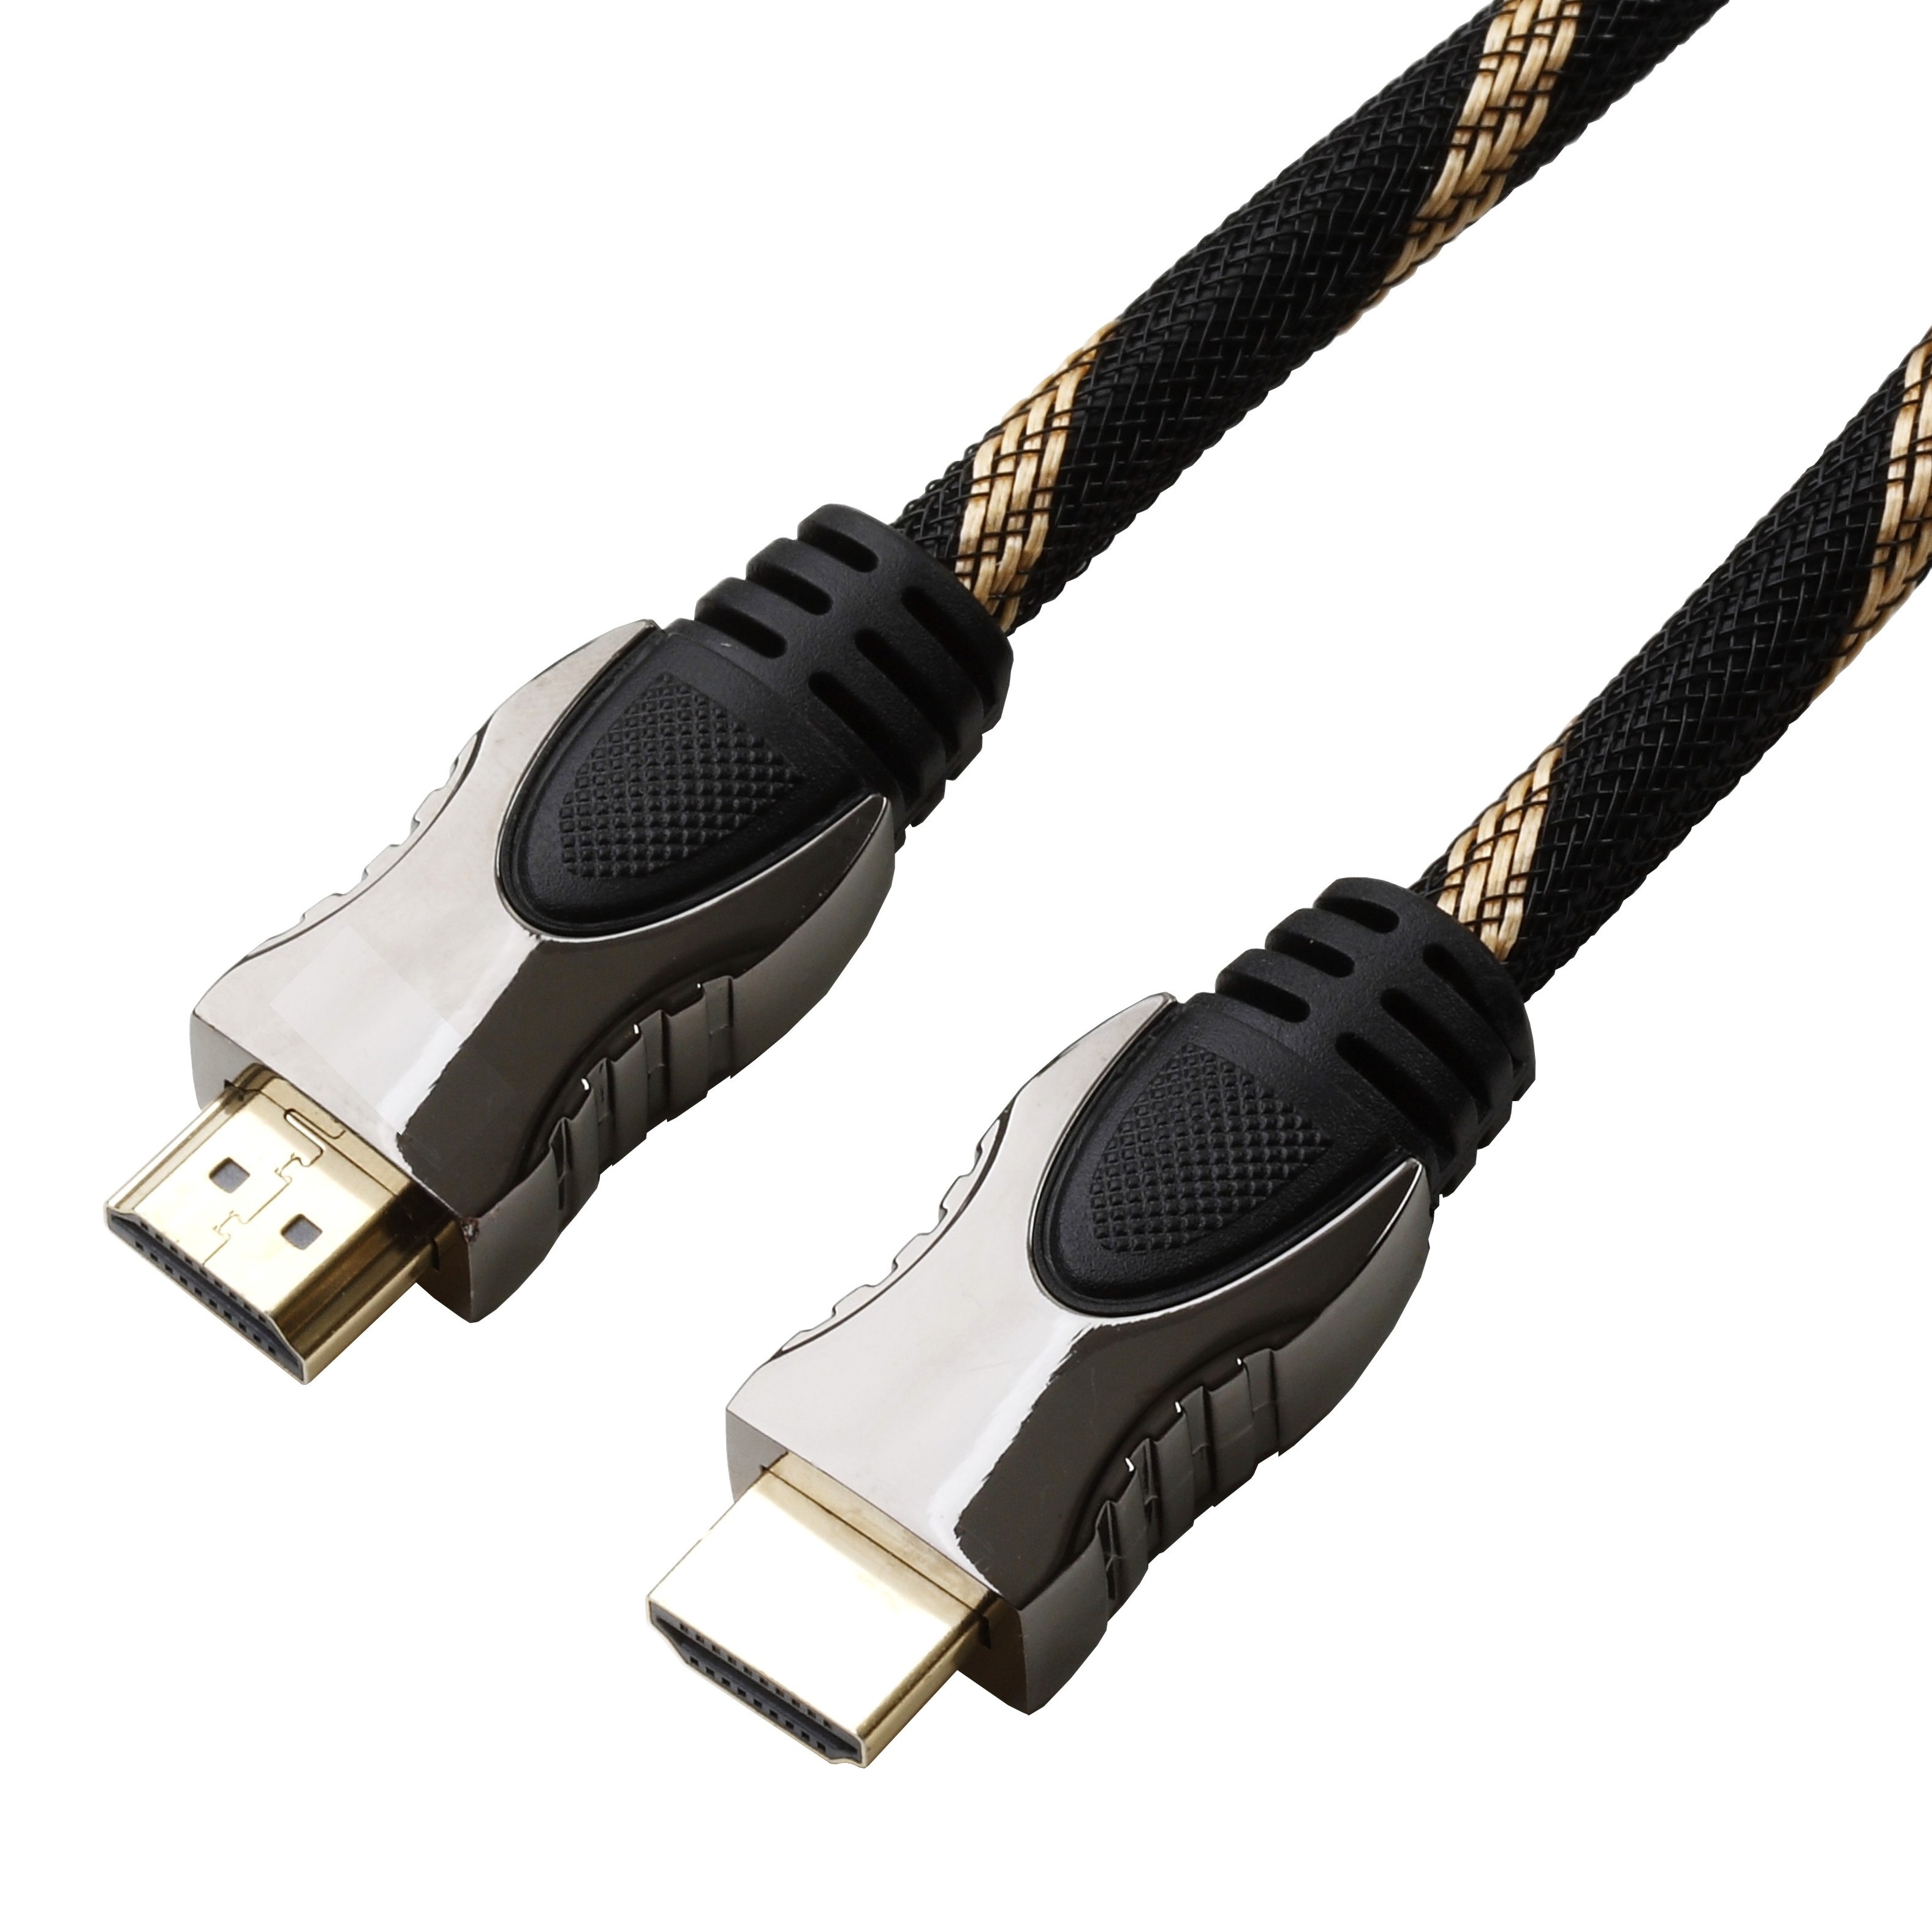 CableCreation HDMI 4K Kabel 3m Projektor usw Blu-ray High Speed 18Gbps mit Ethernet 2160P Xbox One 10FT/Rot Kompatibel mit UHD-TV 4K@60Hz 3D PS5/ PS4 4K@60Hz HDR 1080P PC 